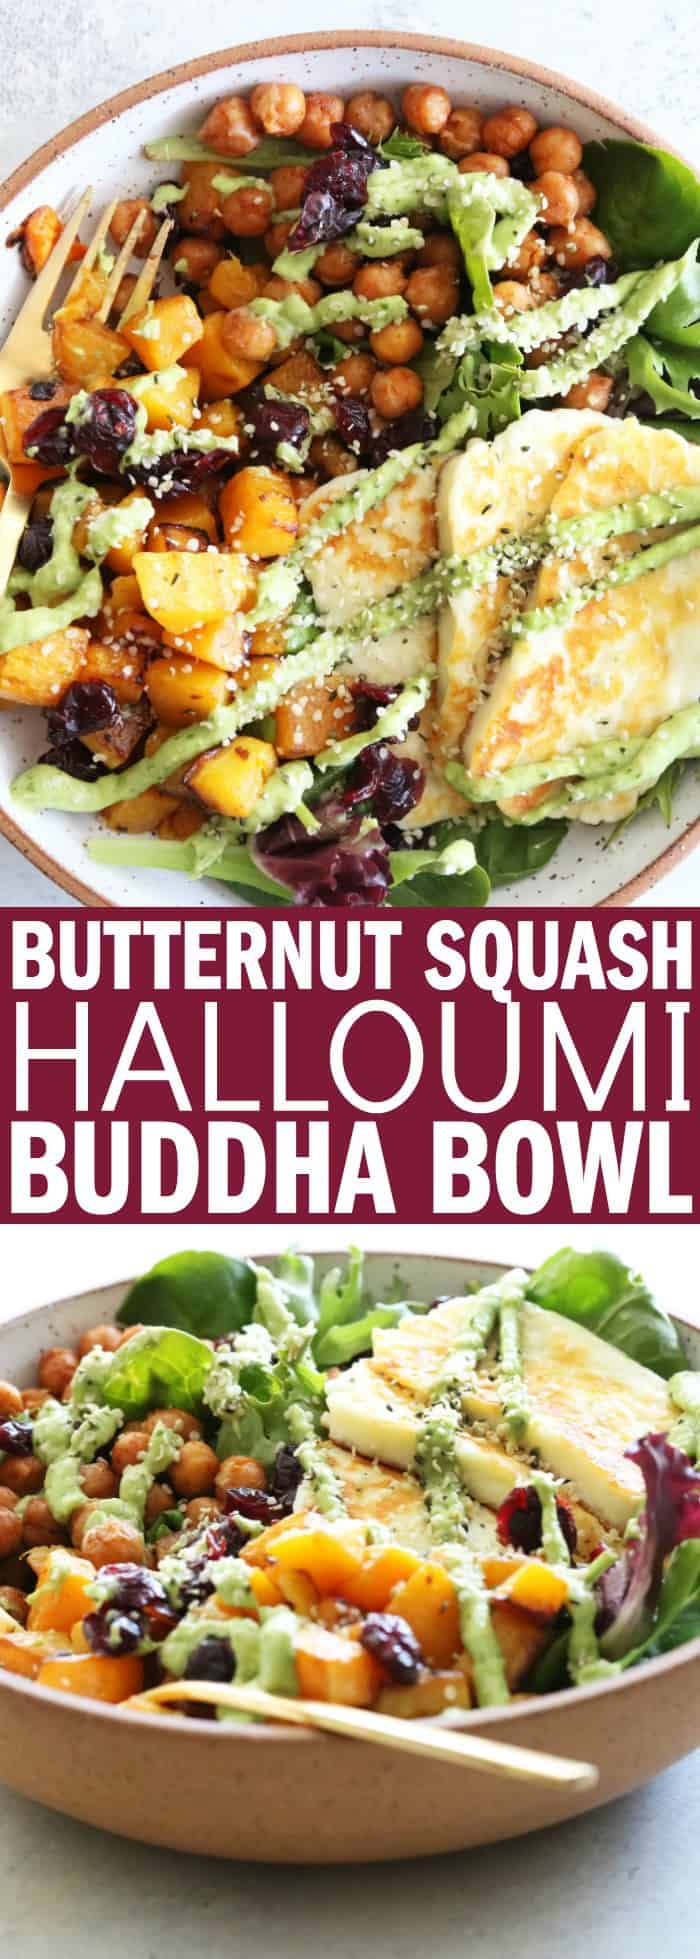 This Butternut Squash Halloumi Buddha Bowl is perfect for your #meatlessmonday dinner!! It's full of delicious, hearty vegetables and flavor! thetoastedpinenut.com #buddhabowl #vegetarian #meatlessmonday #glutenfree #salad #thetoastedpinenut